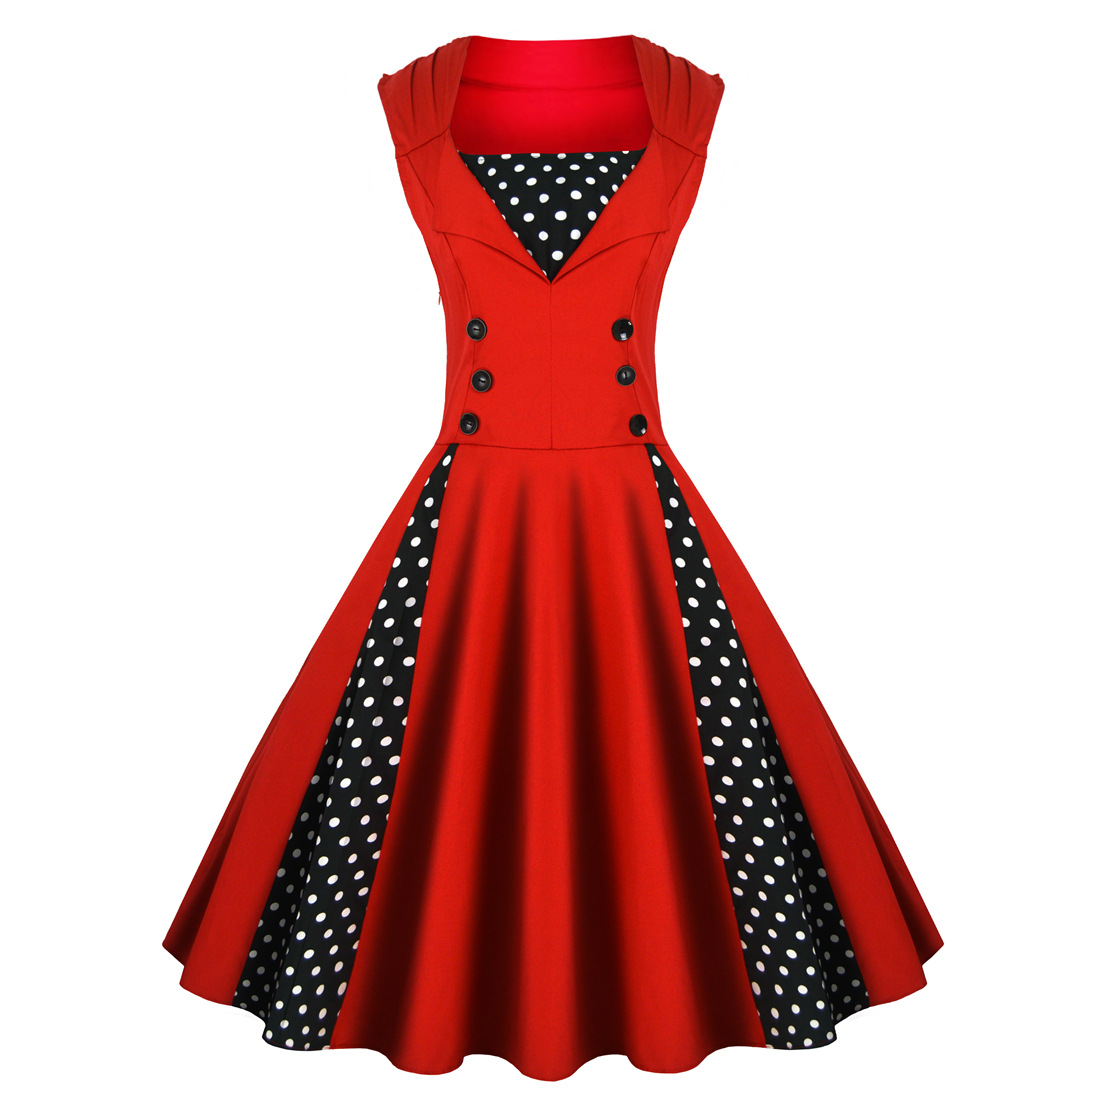 Vintage Dress Polka Dot Patchwork Sleeveless Casual Dress Rockabilly Swing Short Party Dress Red Color,p442